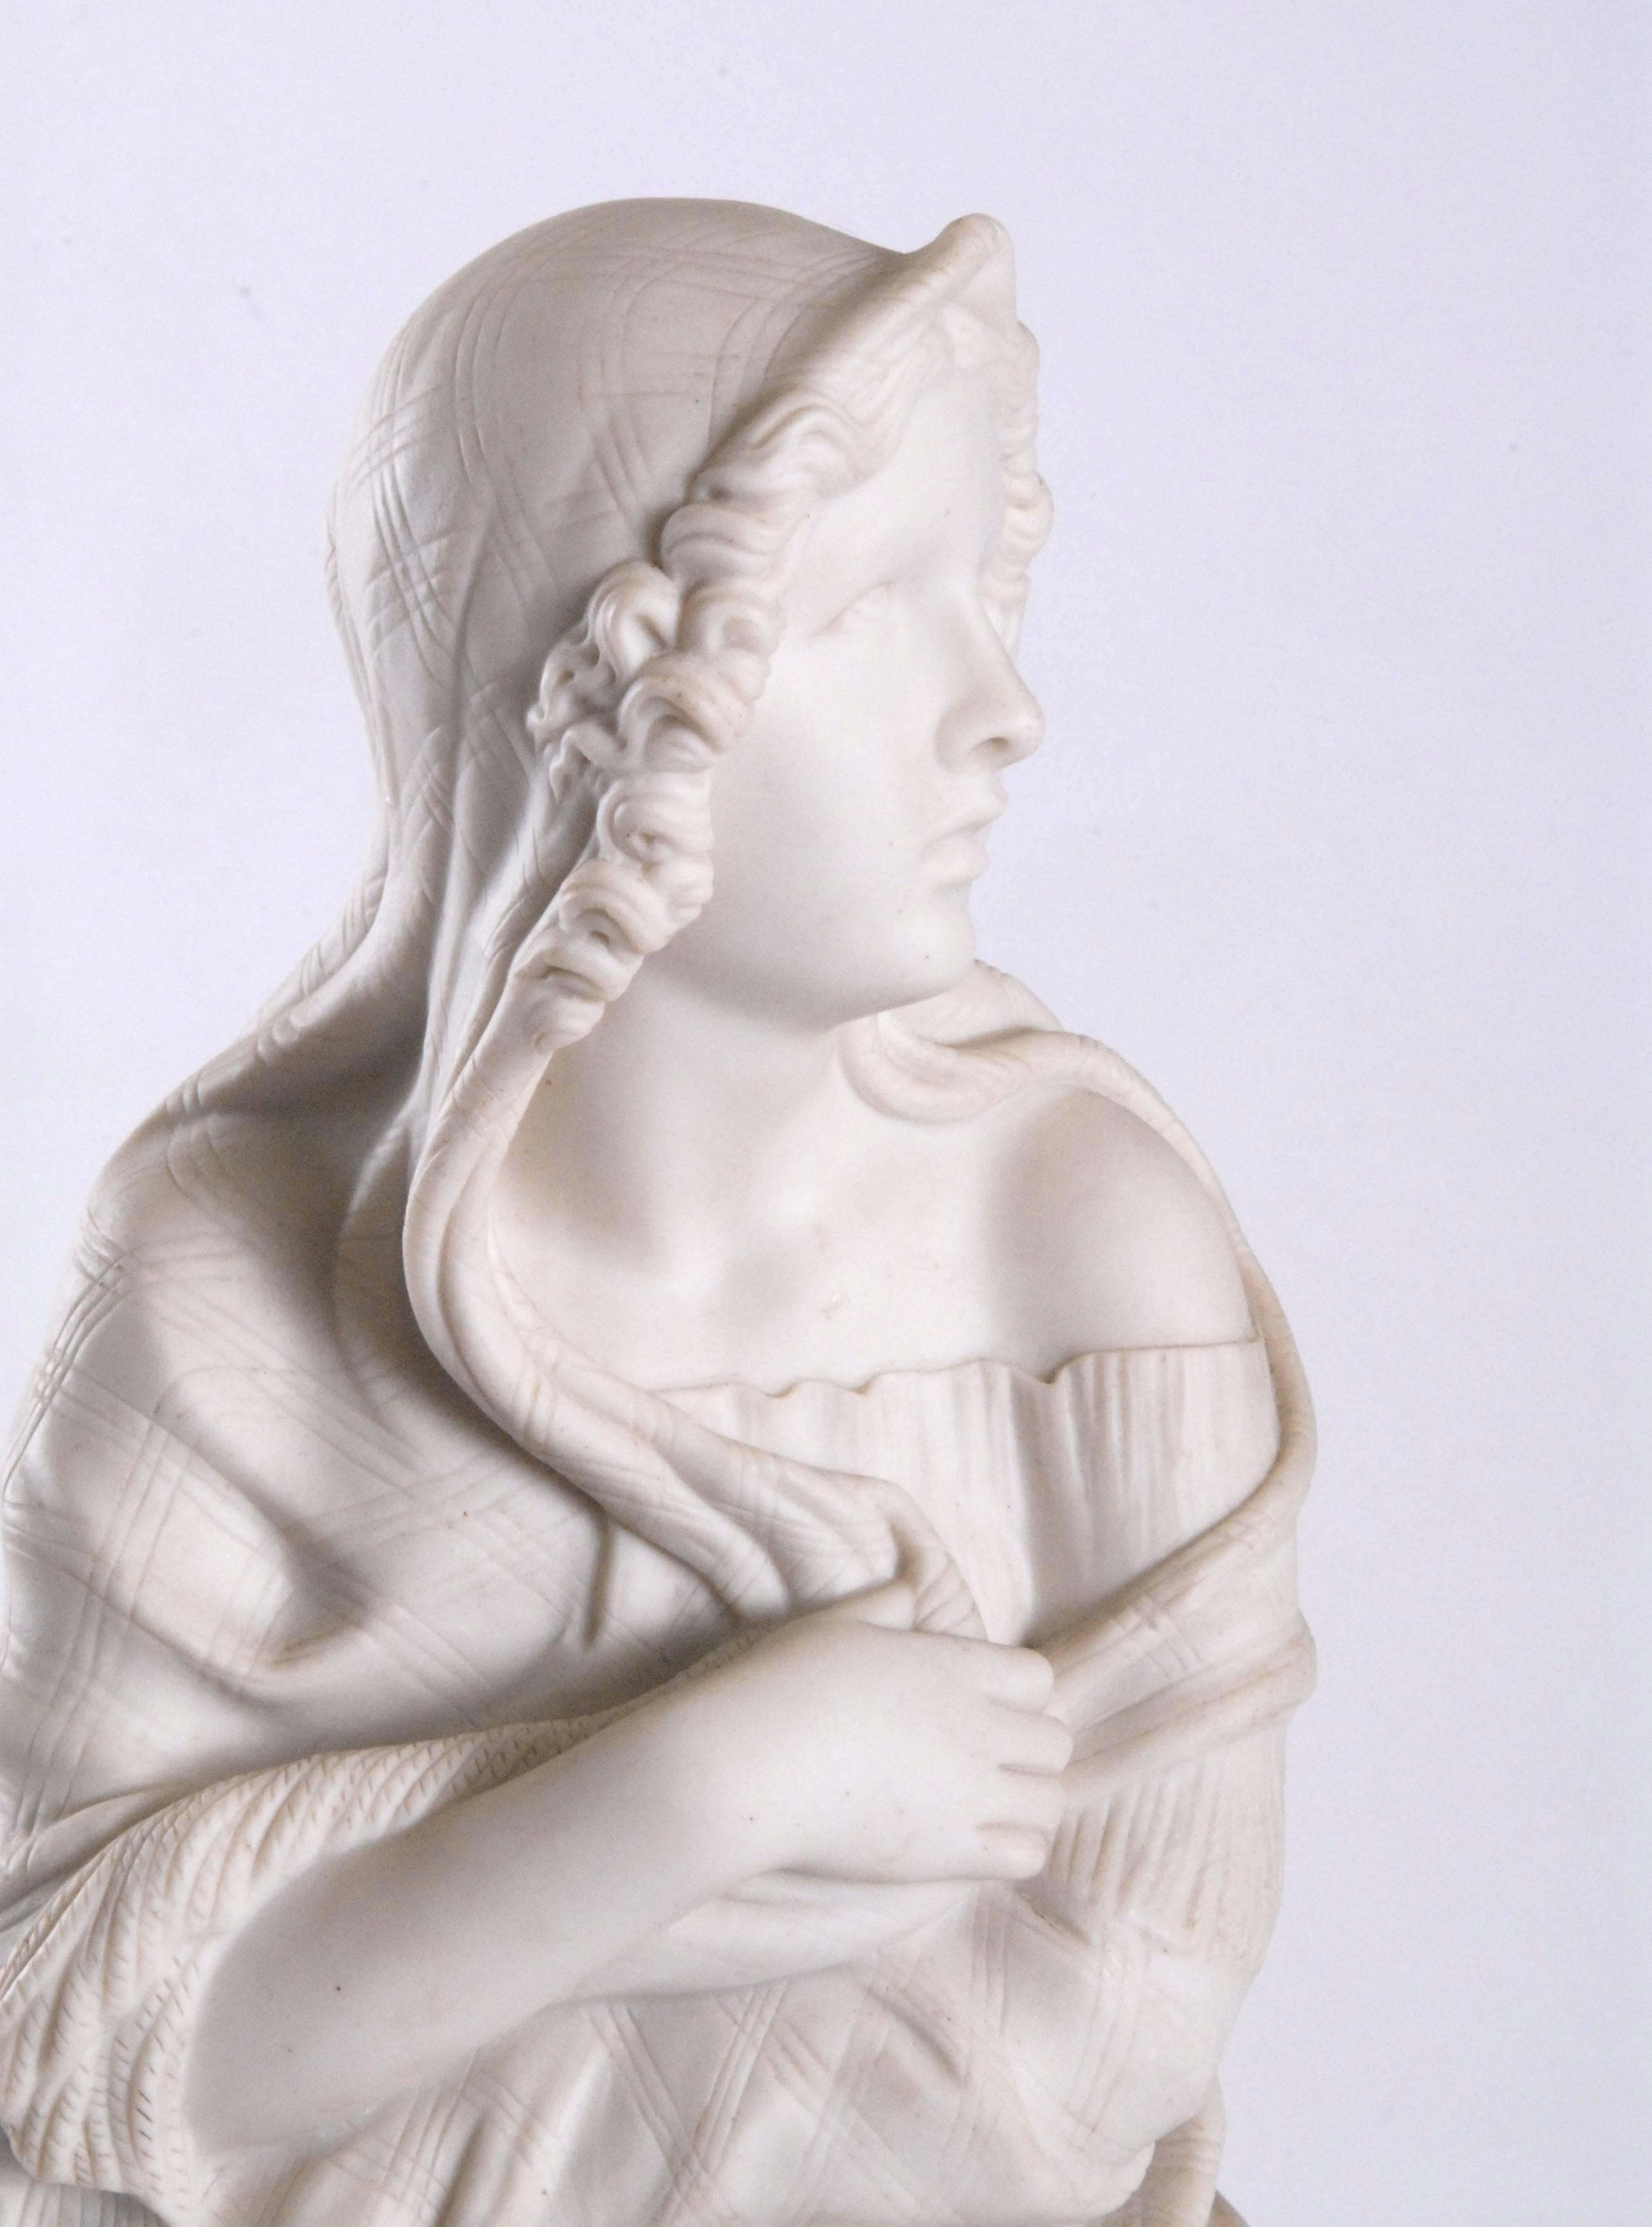 Porcelain 19th Century Copeland Parian Statue, 'Storm' by William Brodie, circa 1858 For Sale